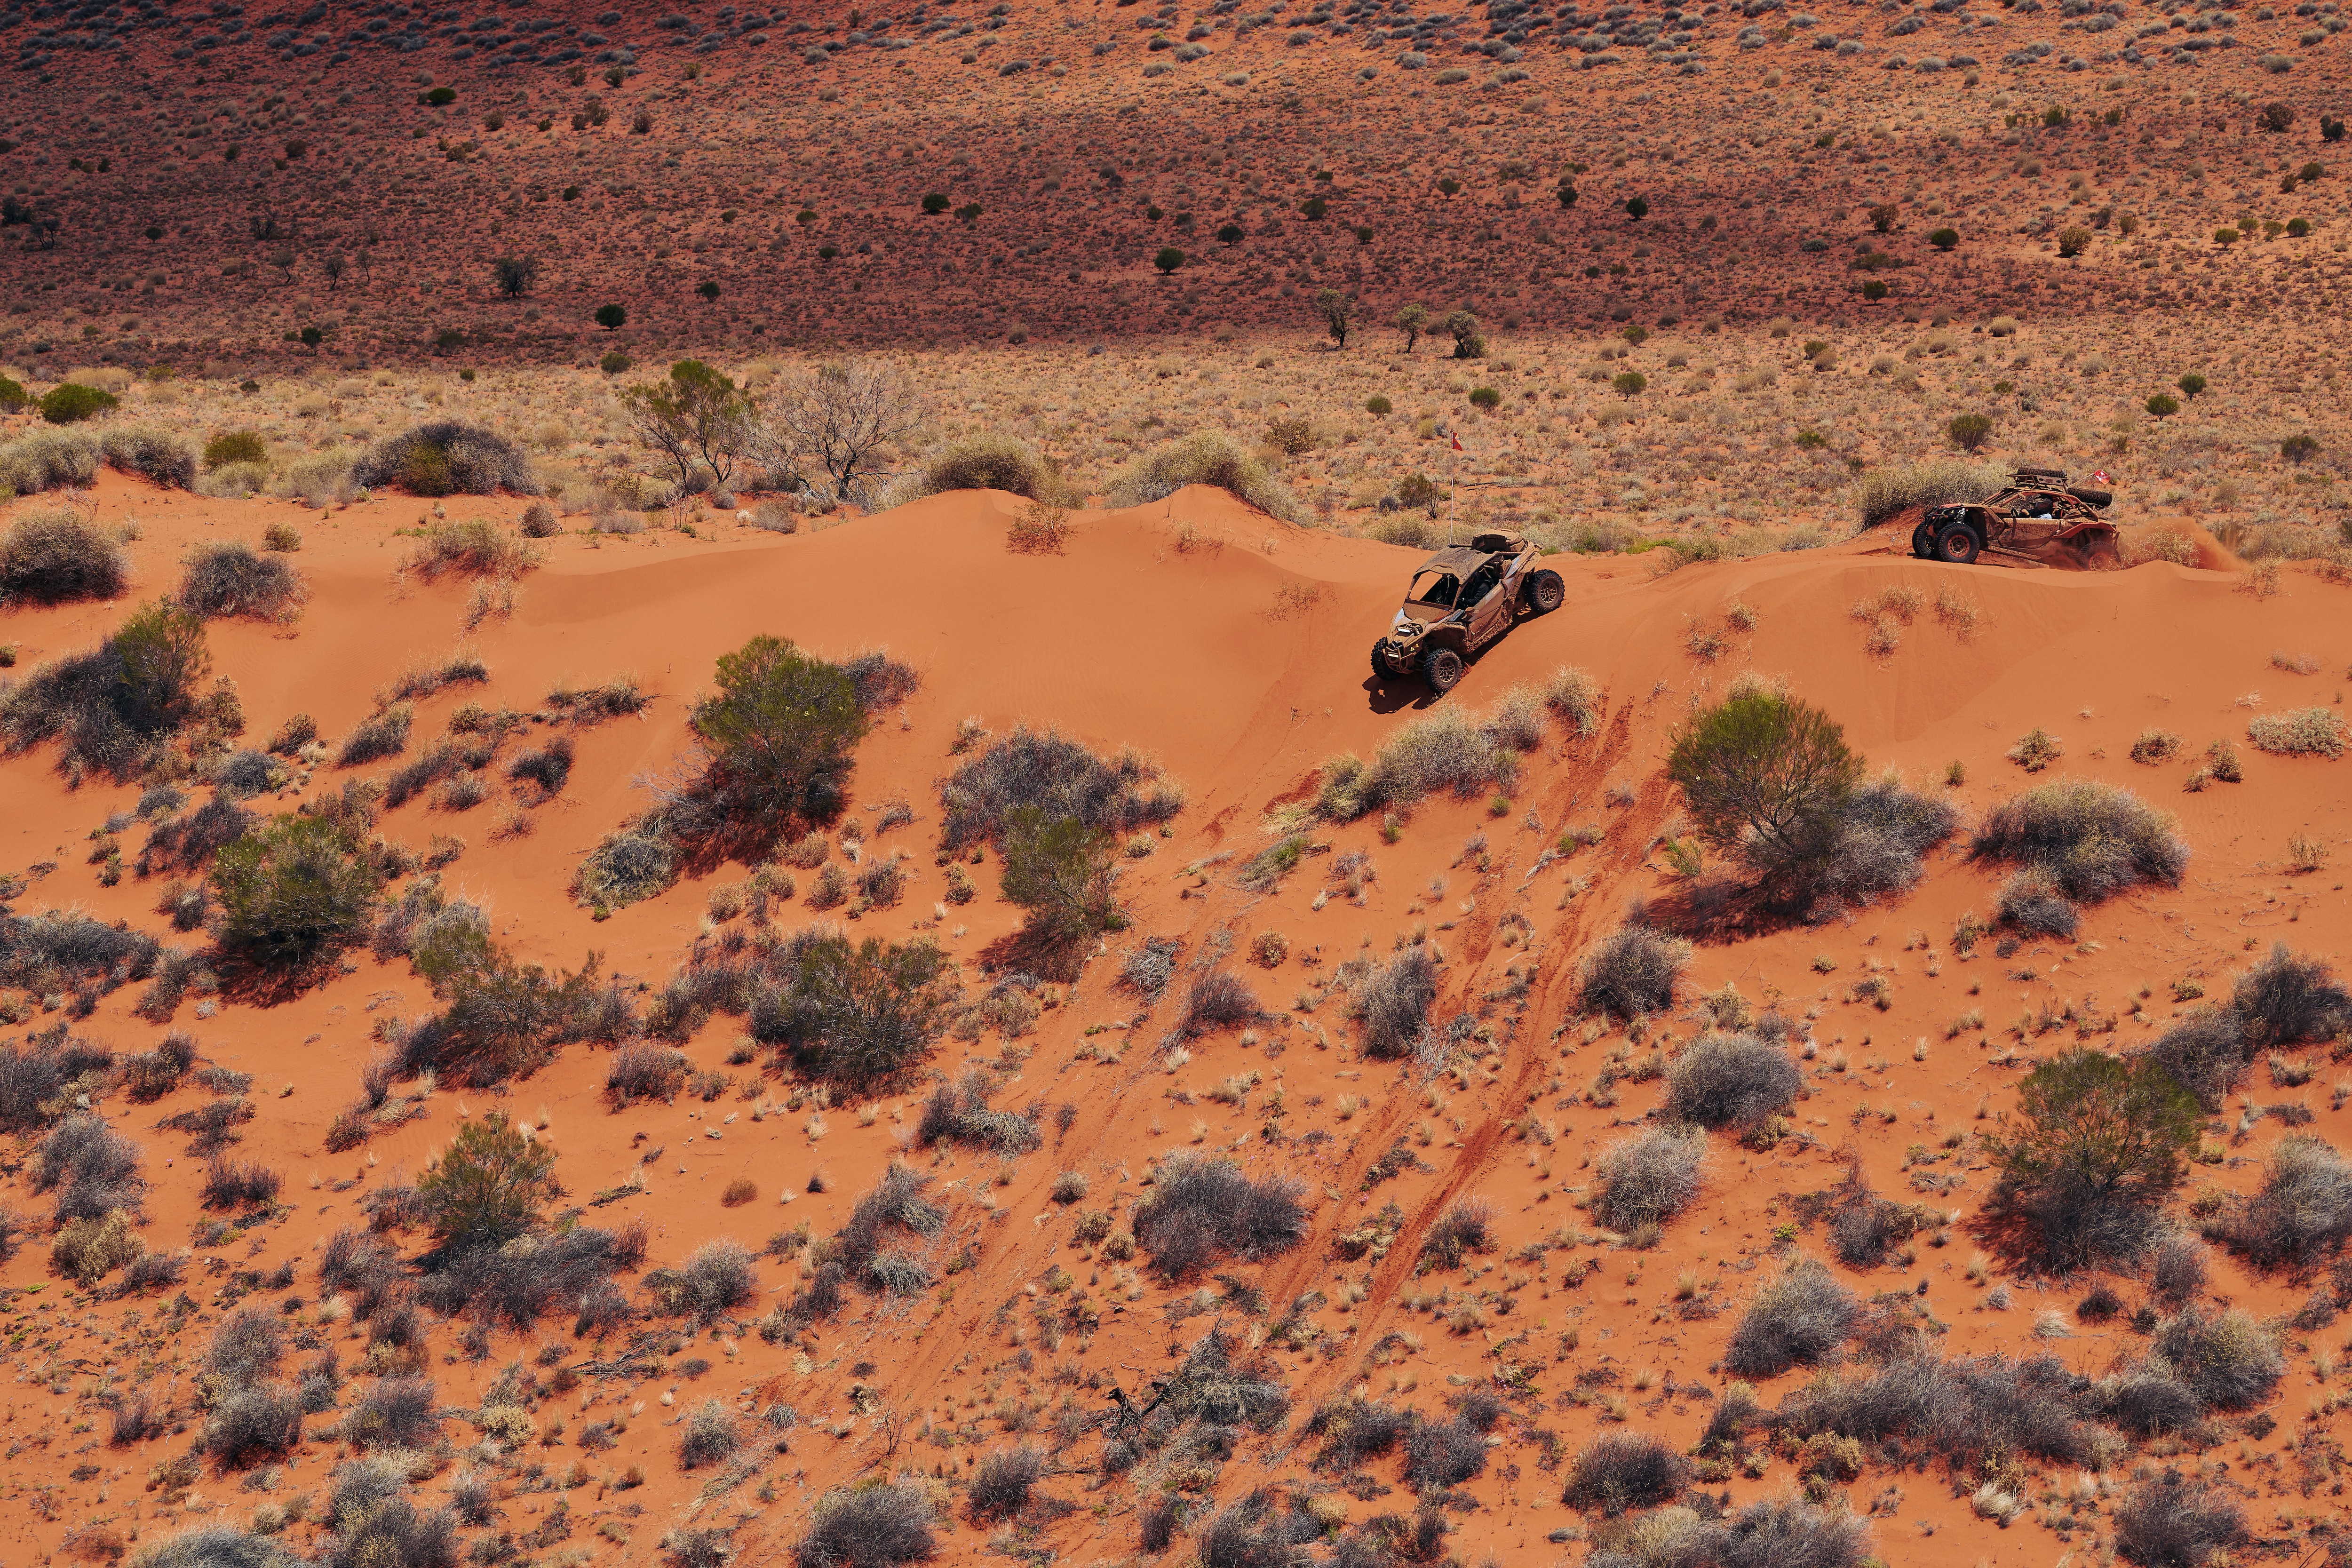 Can-Am Maverick X3 driving down the face of a sand dune